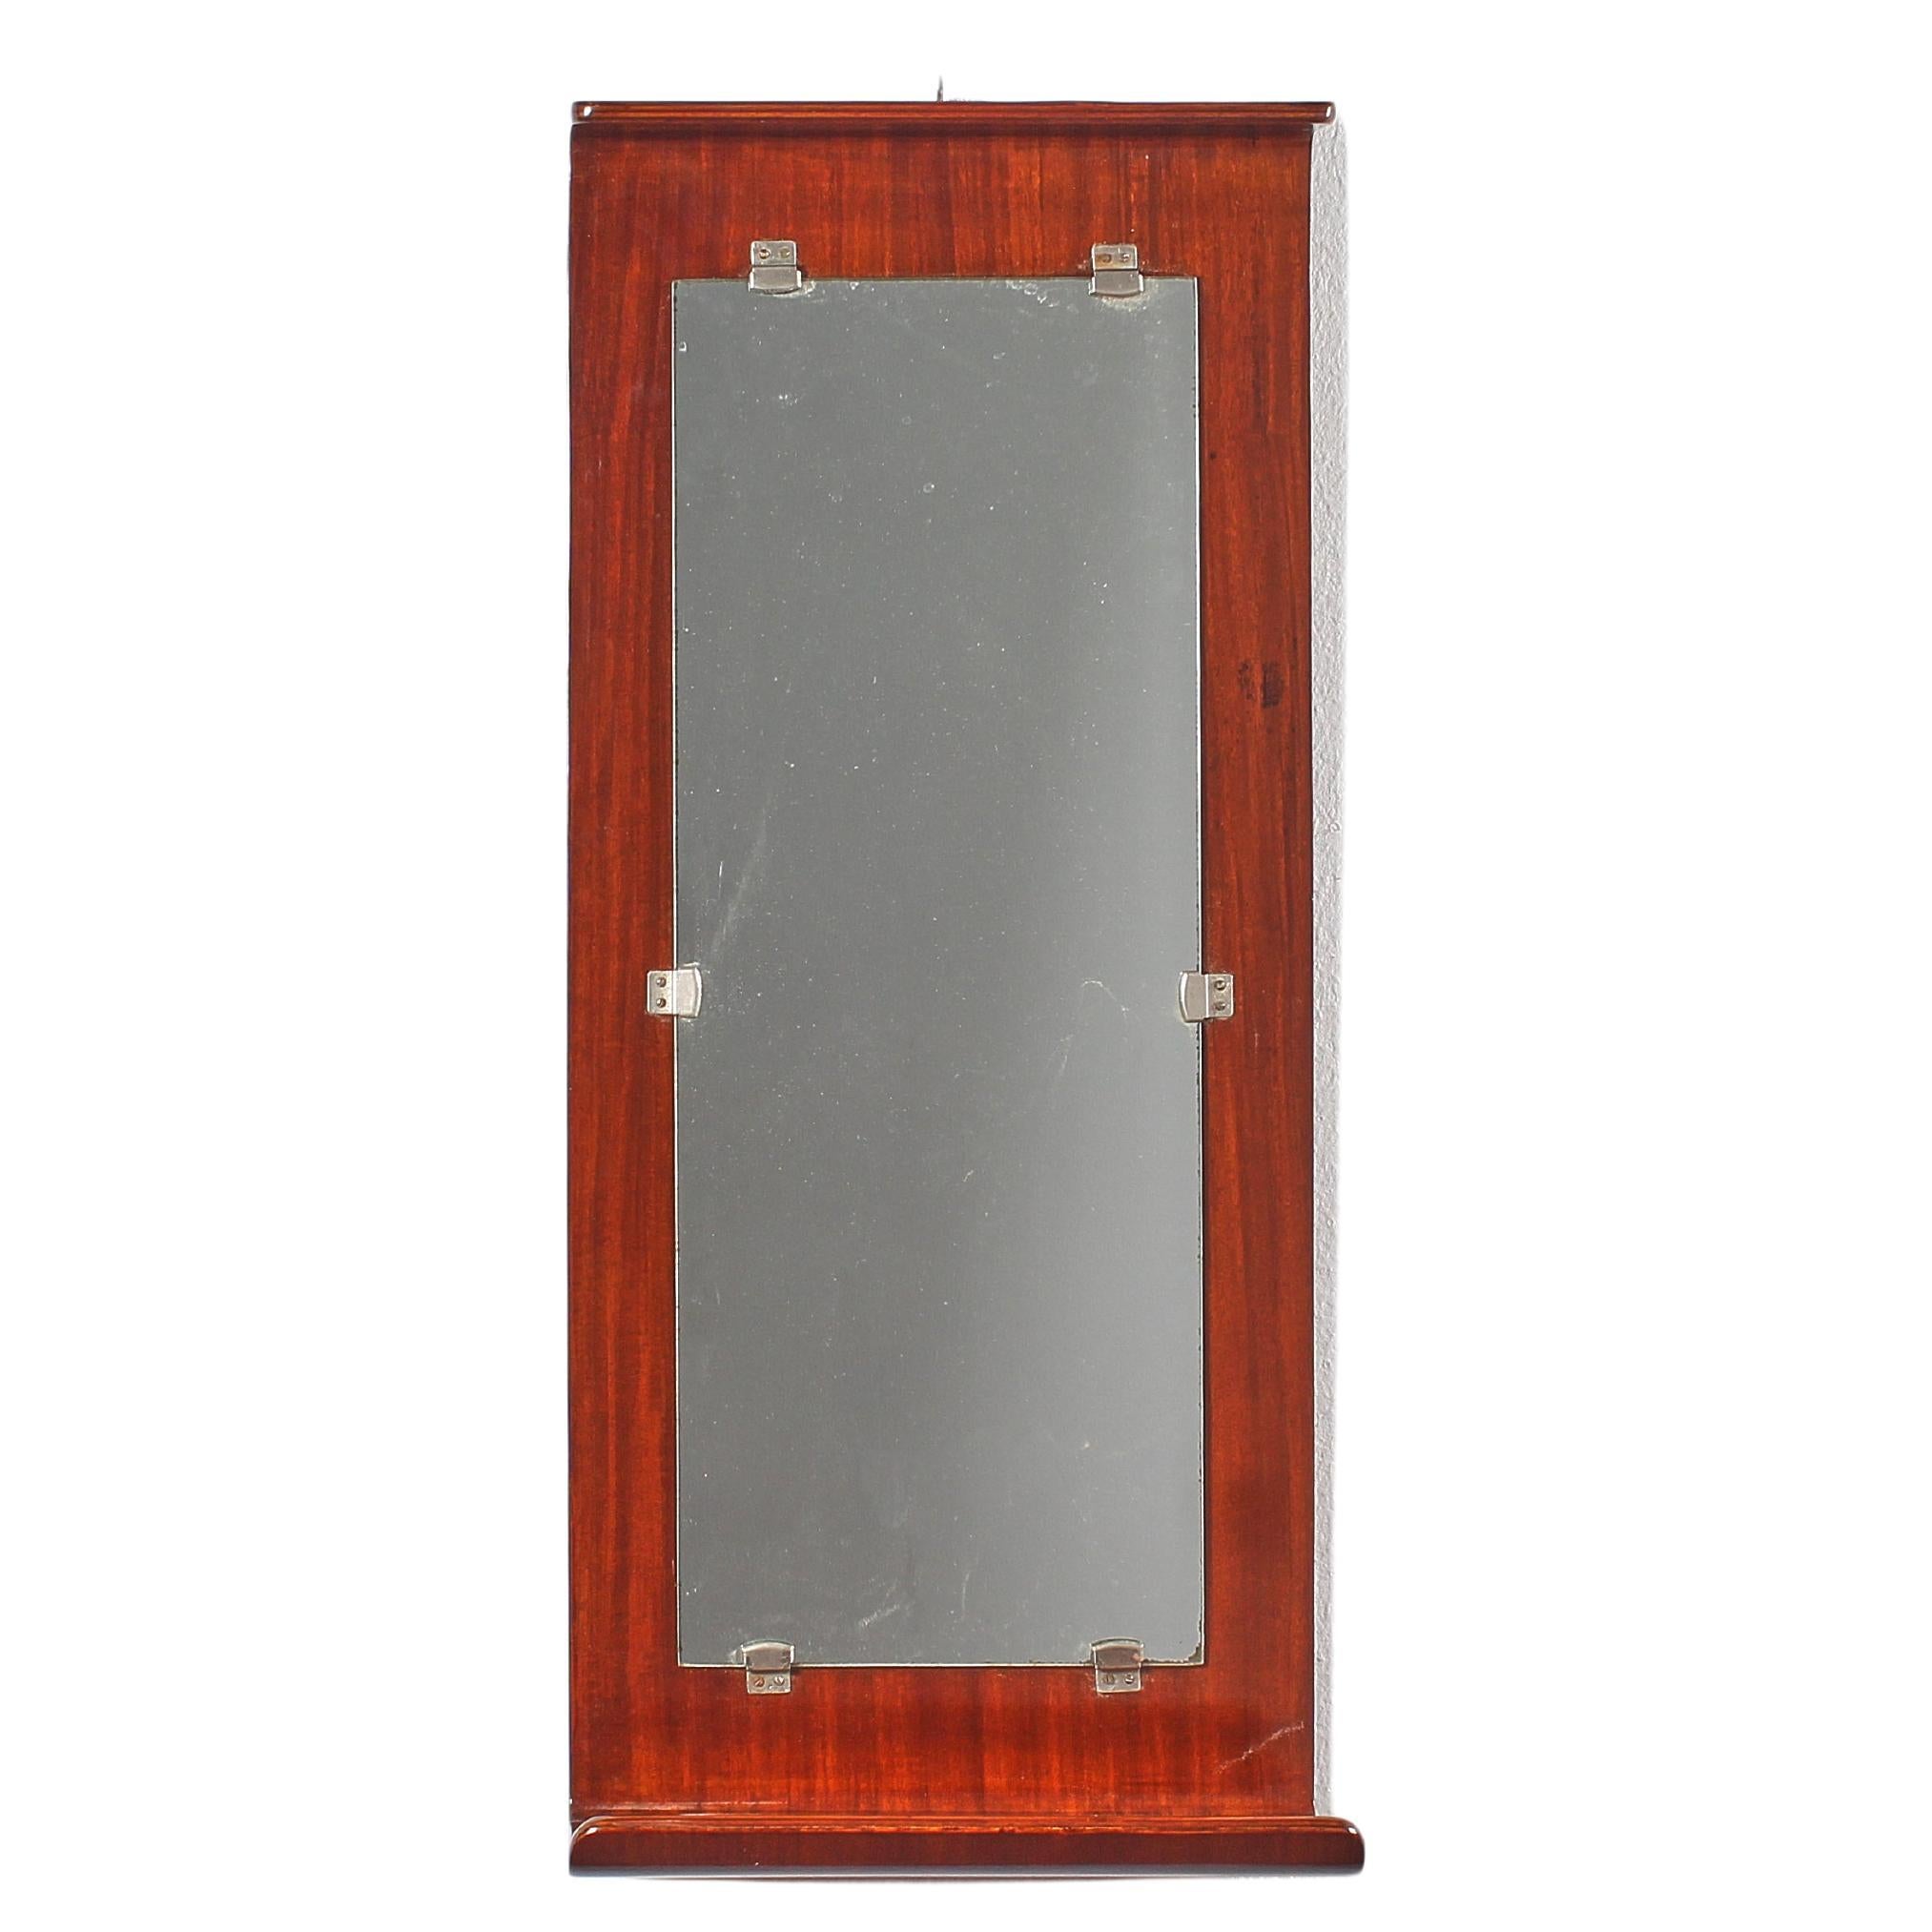 Rectangular mirror with plywood support curved to form a double shelf, top and bottom, bathroom items holder. Italian manufacture attributable to Carlo Graffi for Home Torino, 1960s. Restored.
Wear consistent with age and use.